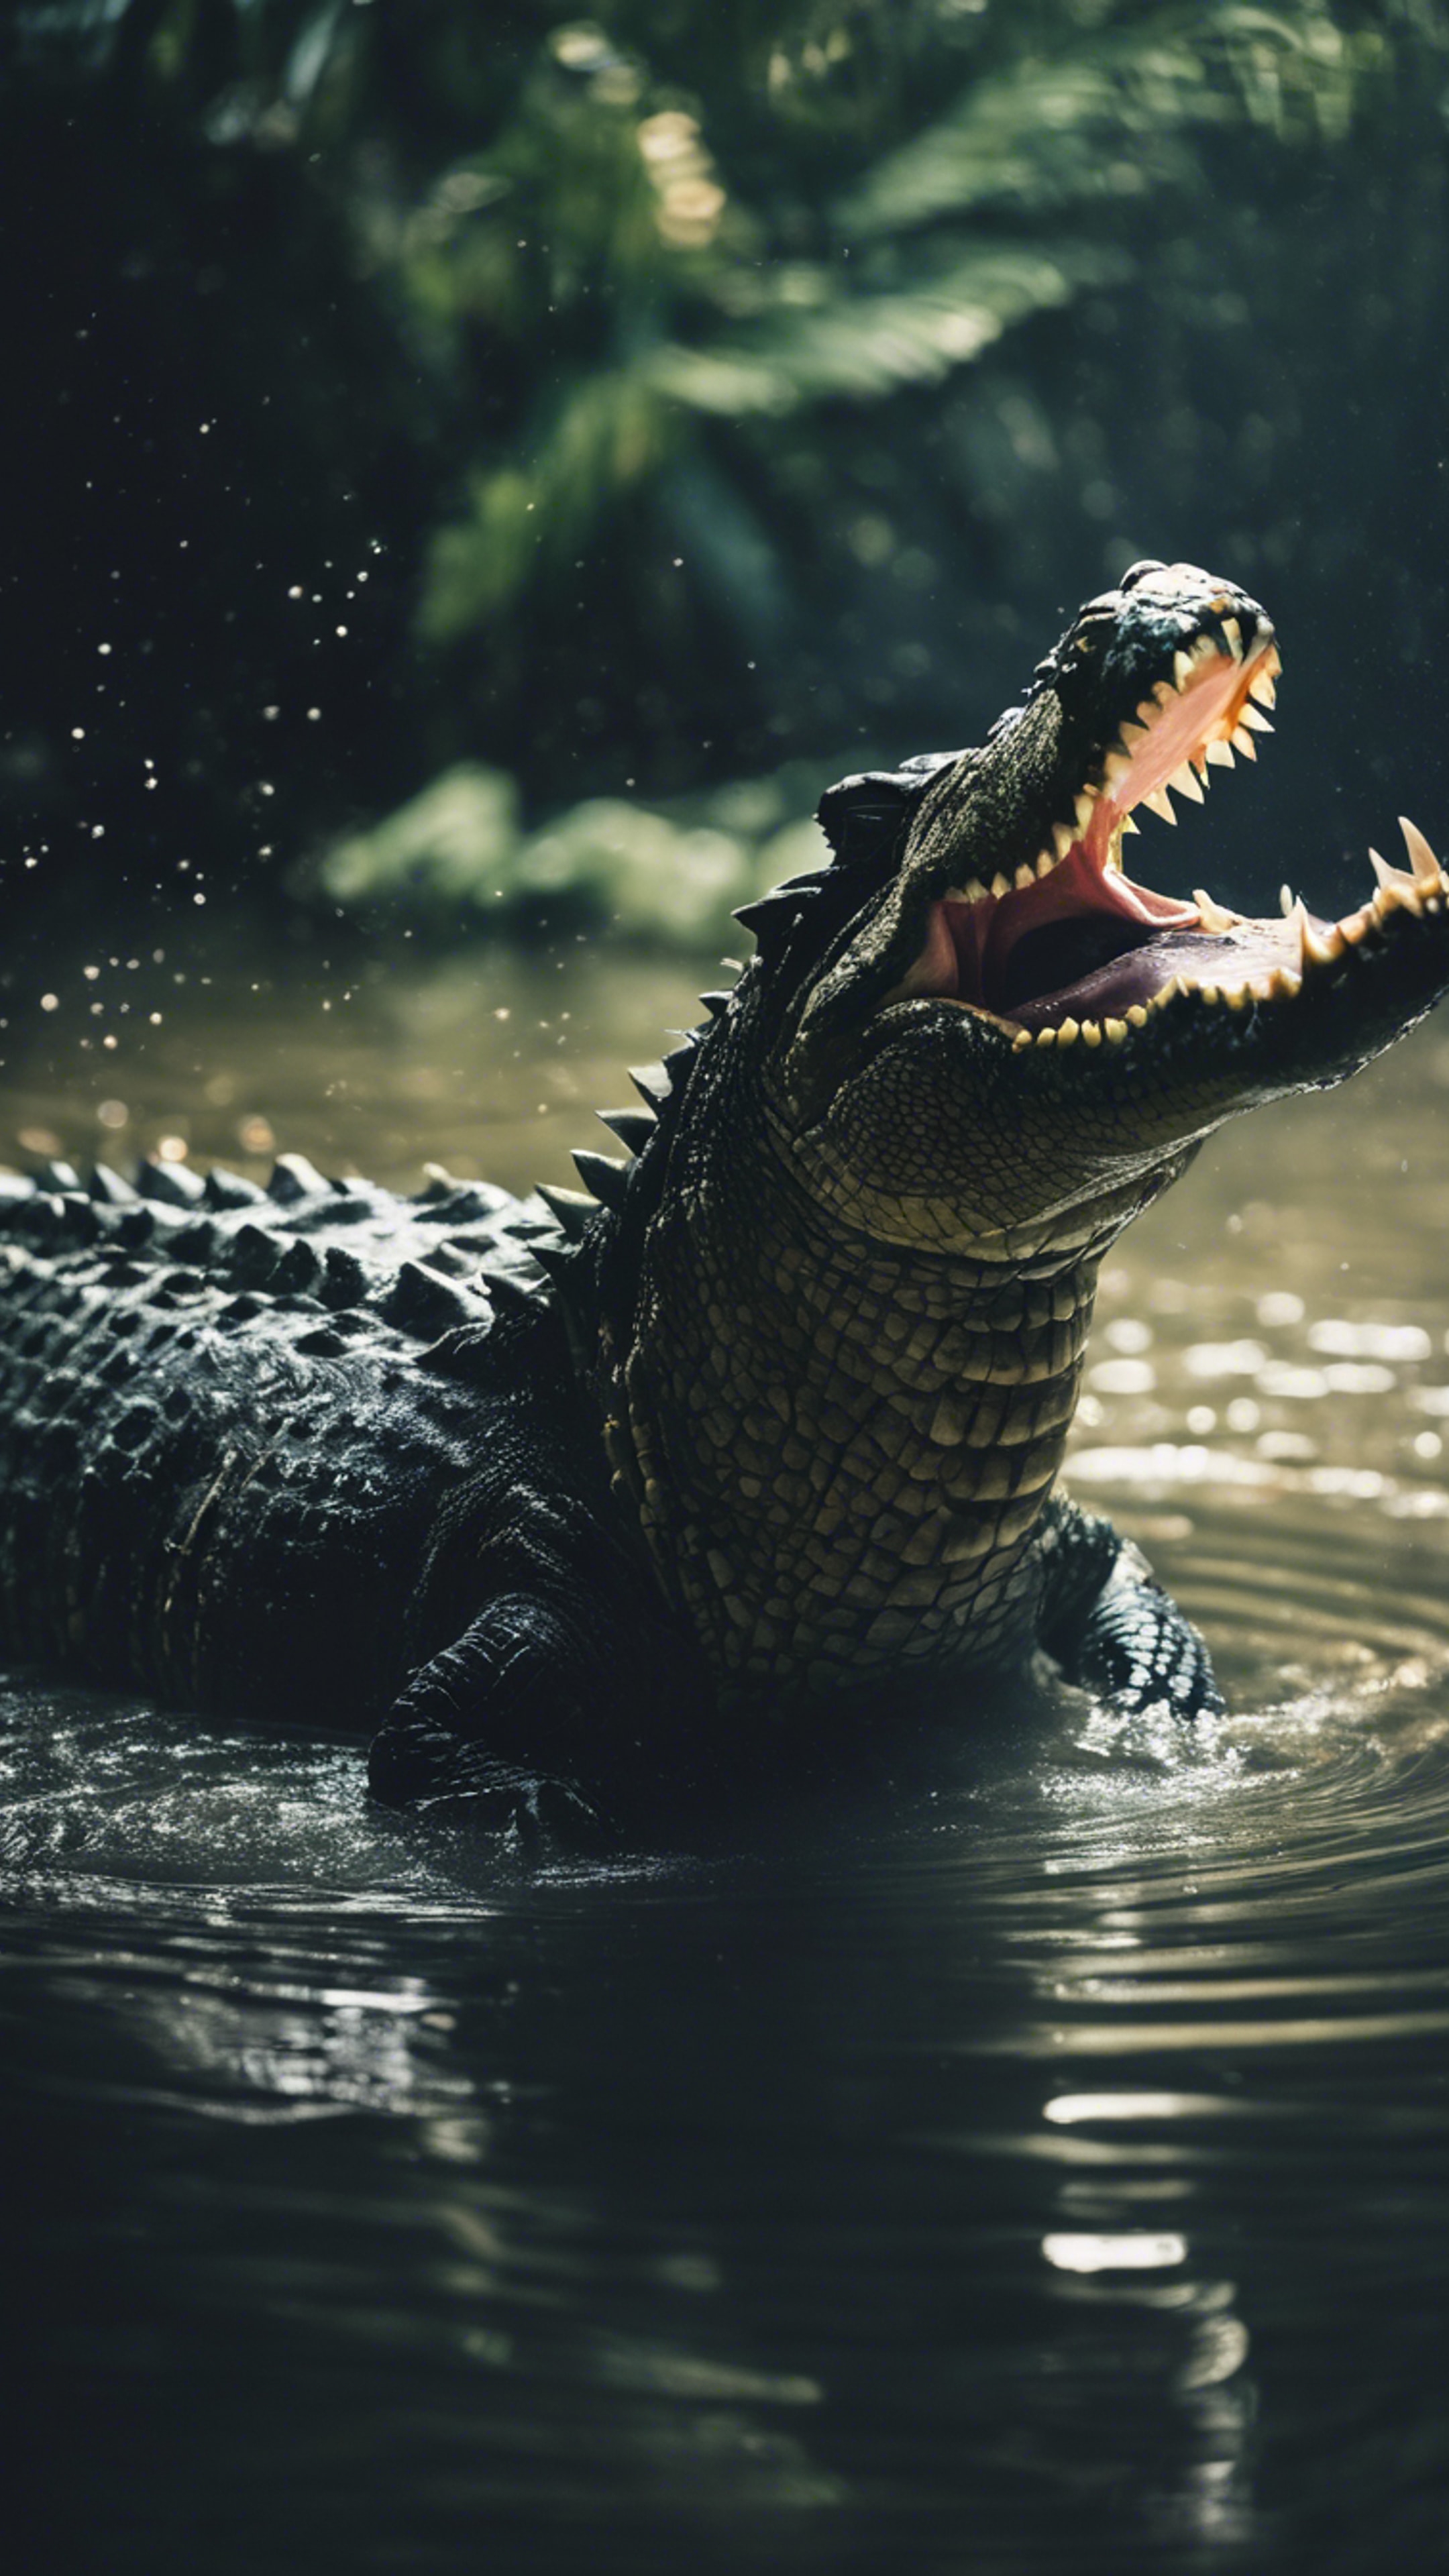 Two crocodiles engaging in a territorial battle in the middle of a dark lagoon. ورق الجدران[ccc66b55c2b3408d8928]